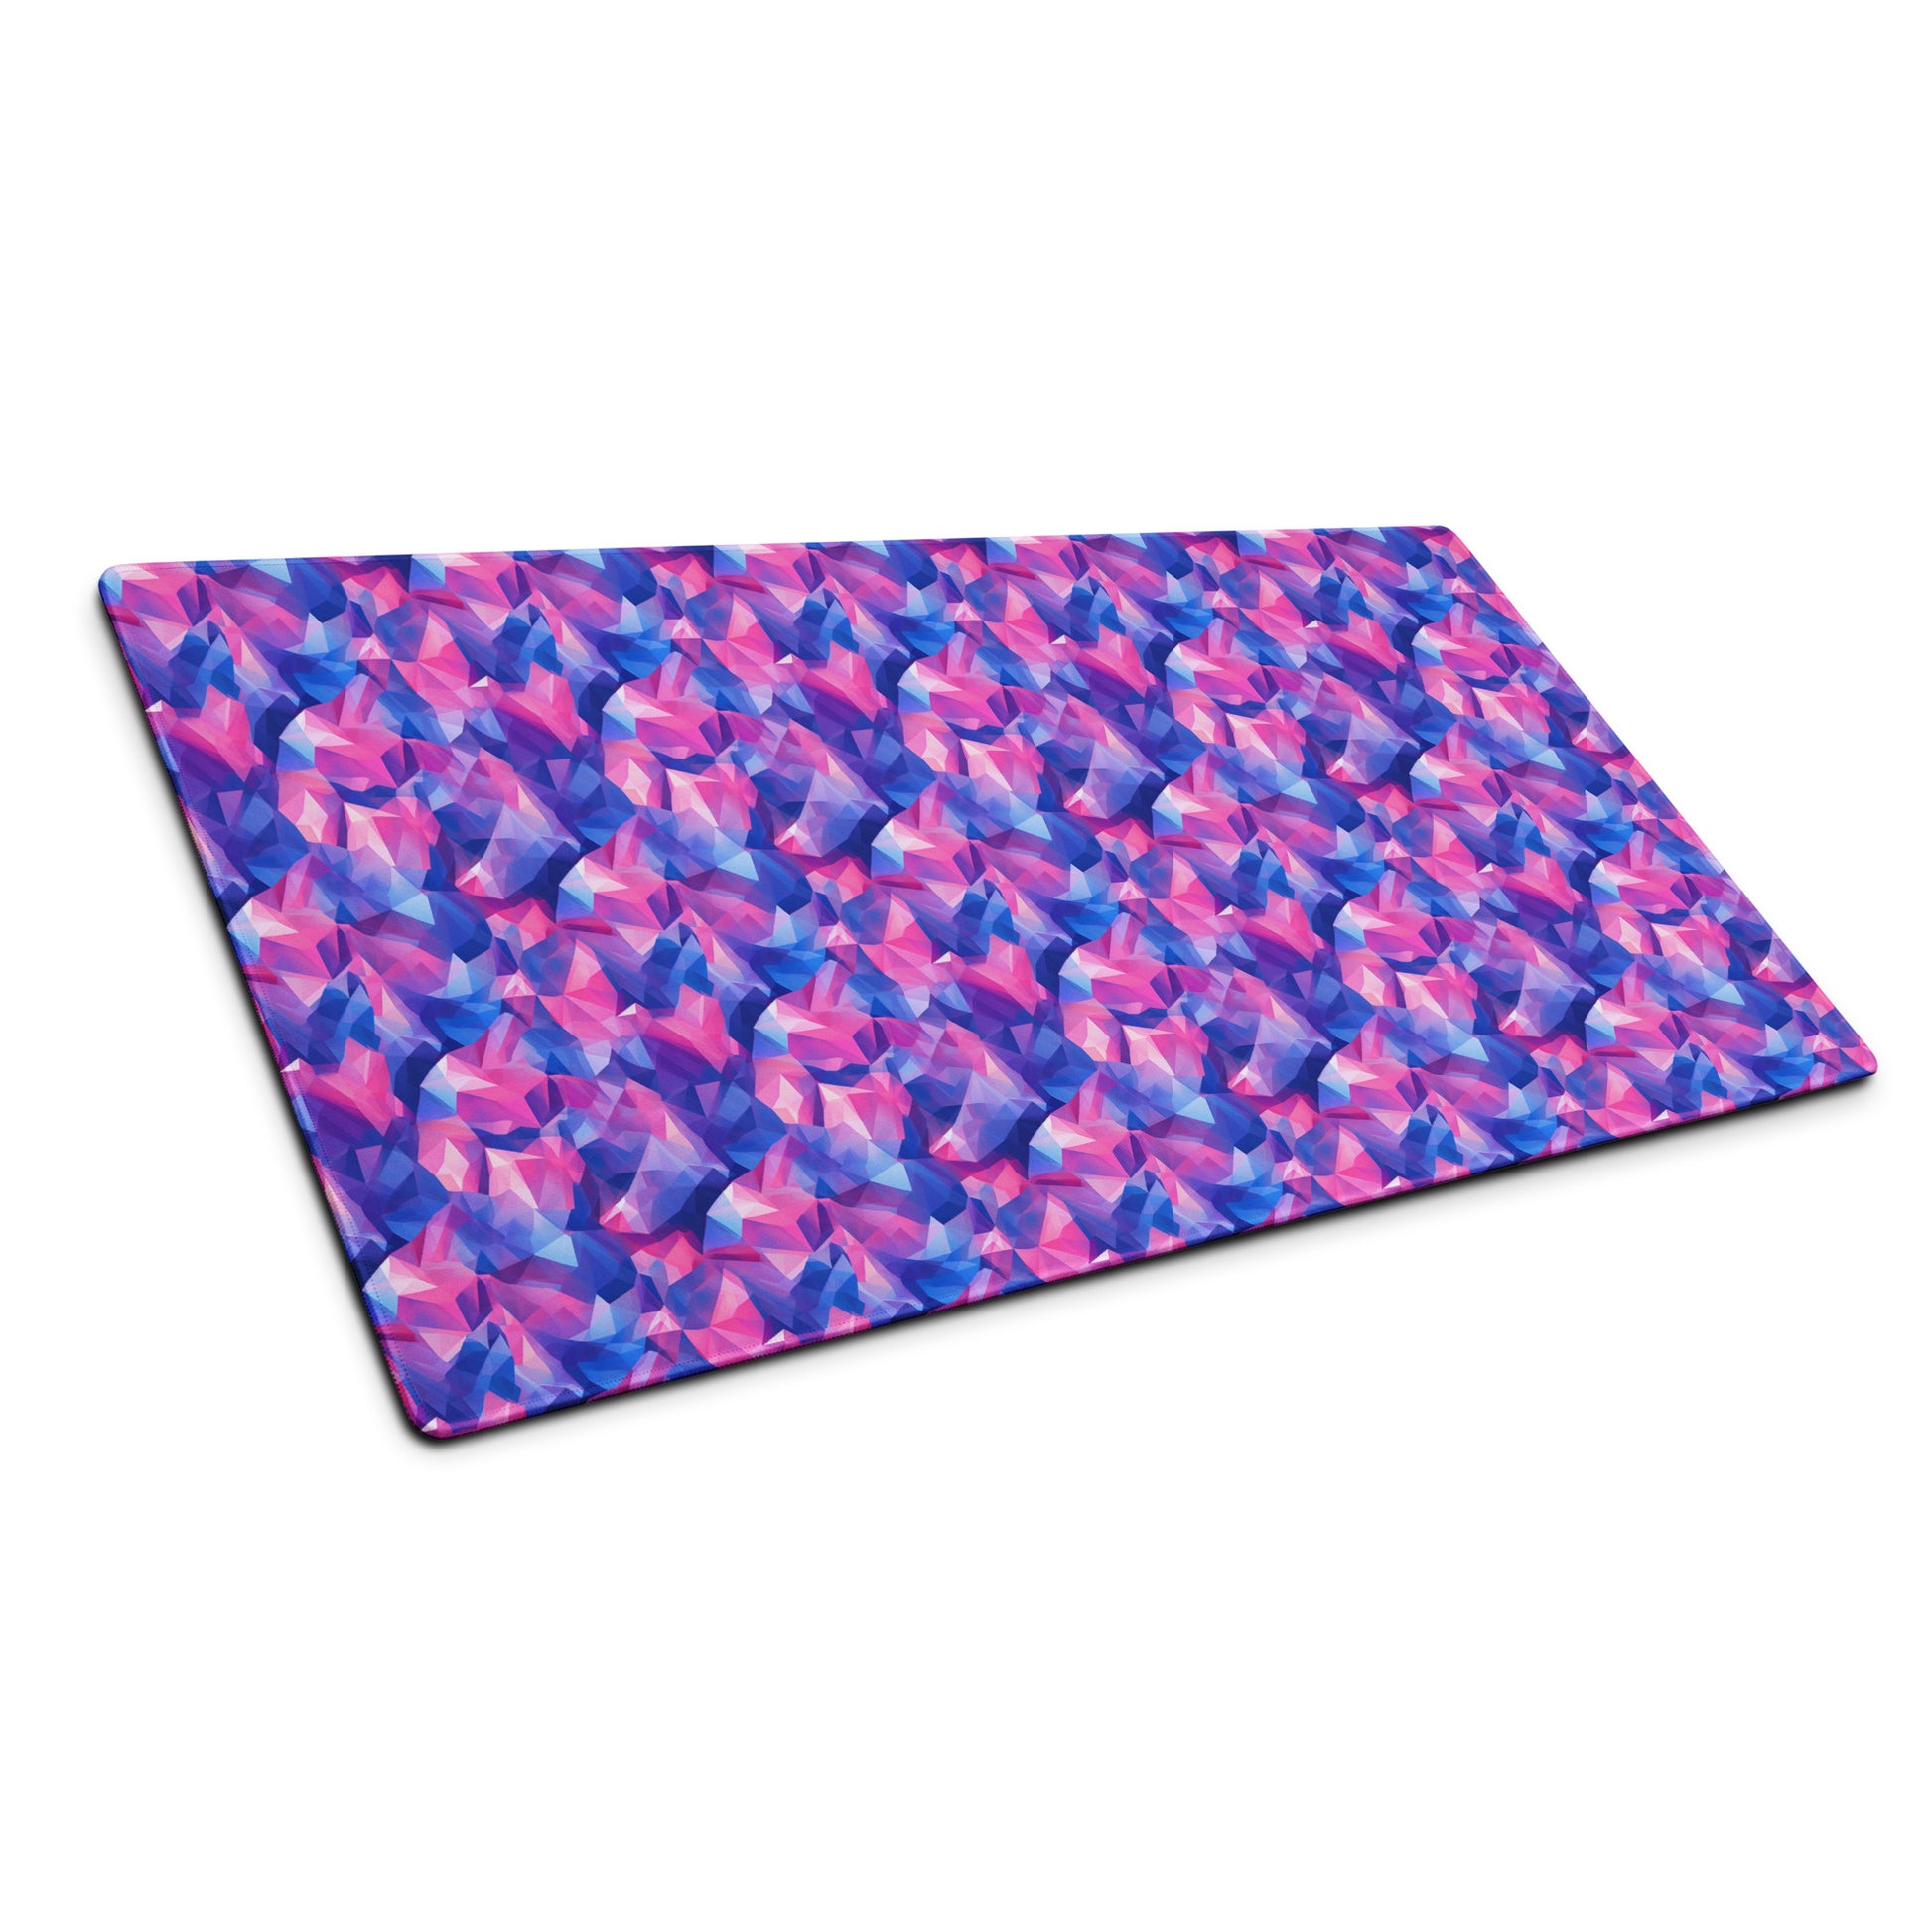 A 36" x 18" gaming desk pad with pink and blue crystals sitting at an angle.